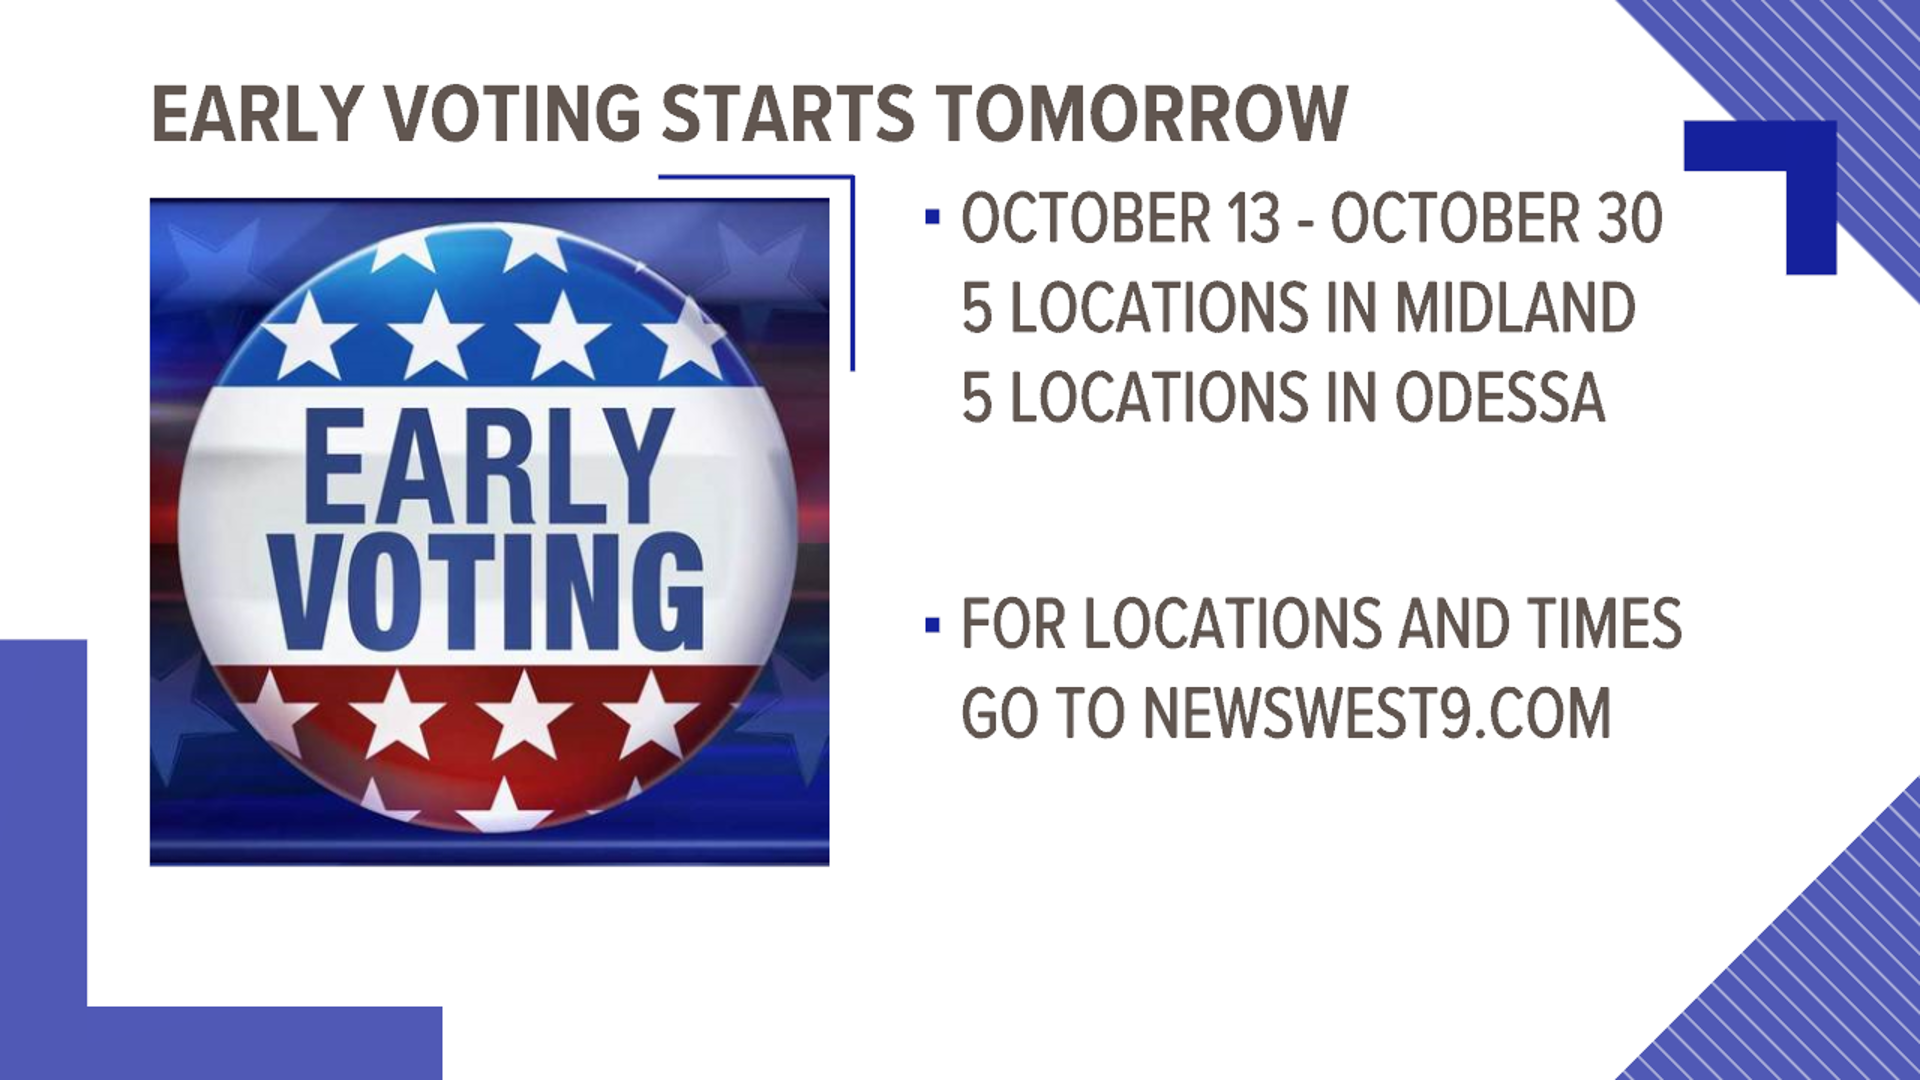 Early voting begins October 13 and goes through October 30.